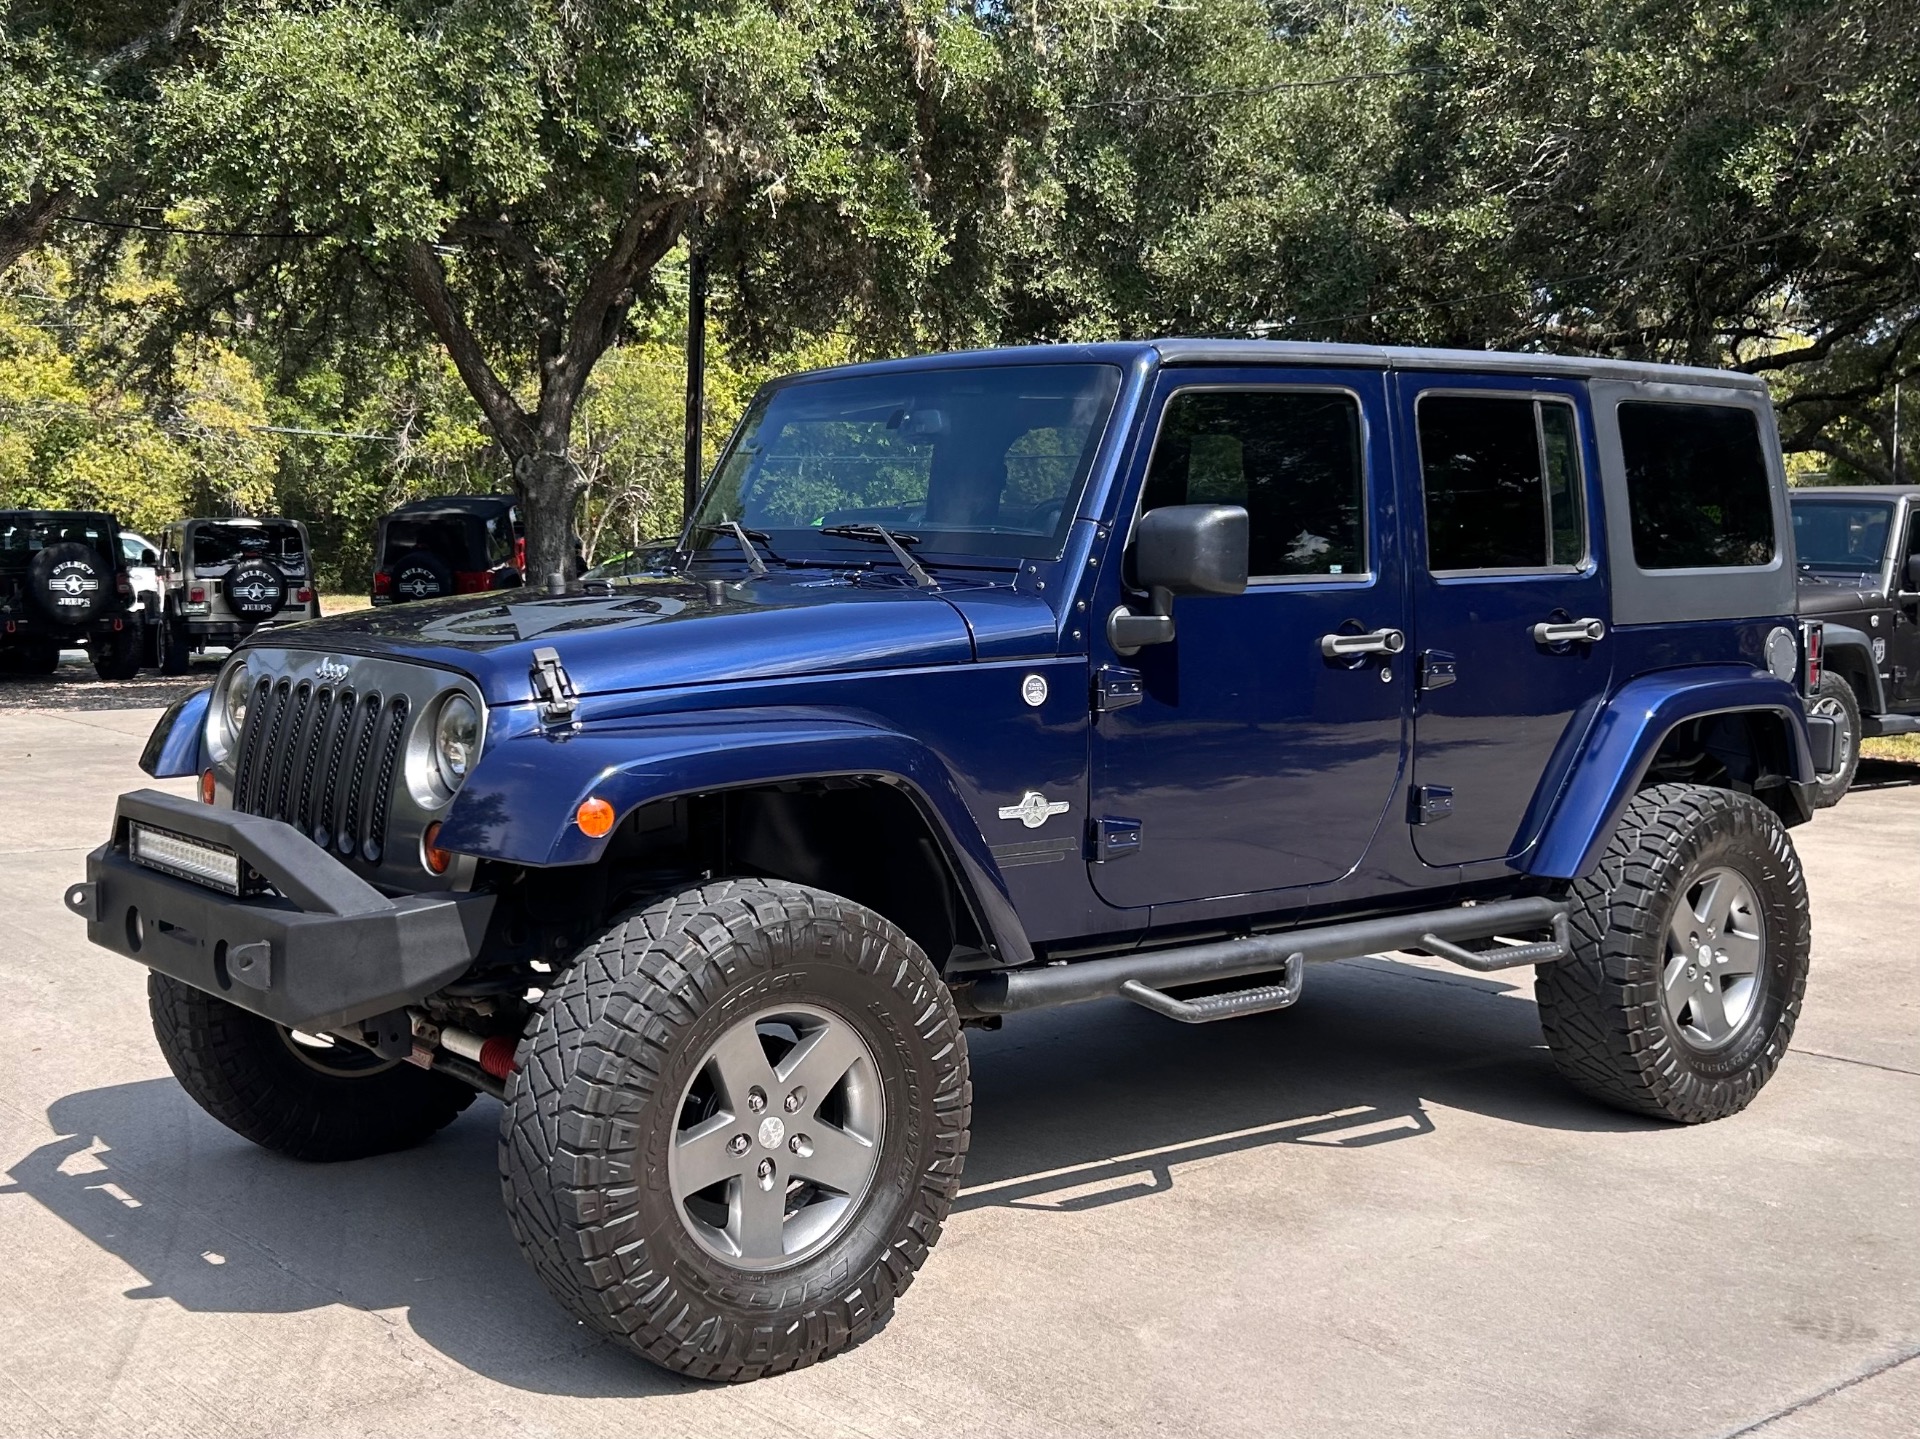 Used-2013-Jeep-Wrangler-Unlimited-Freedom-Edition